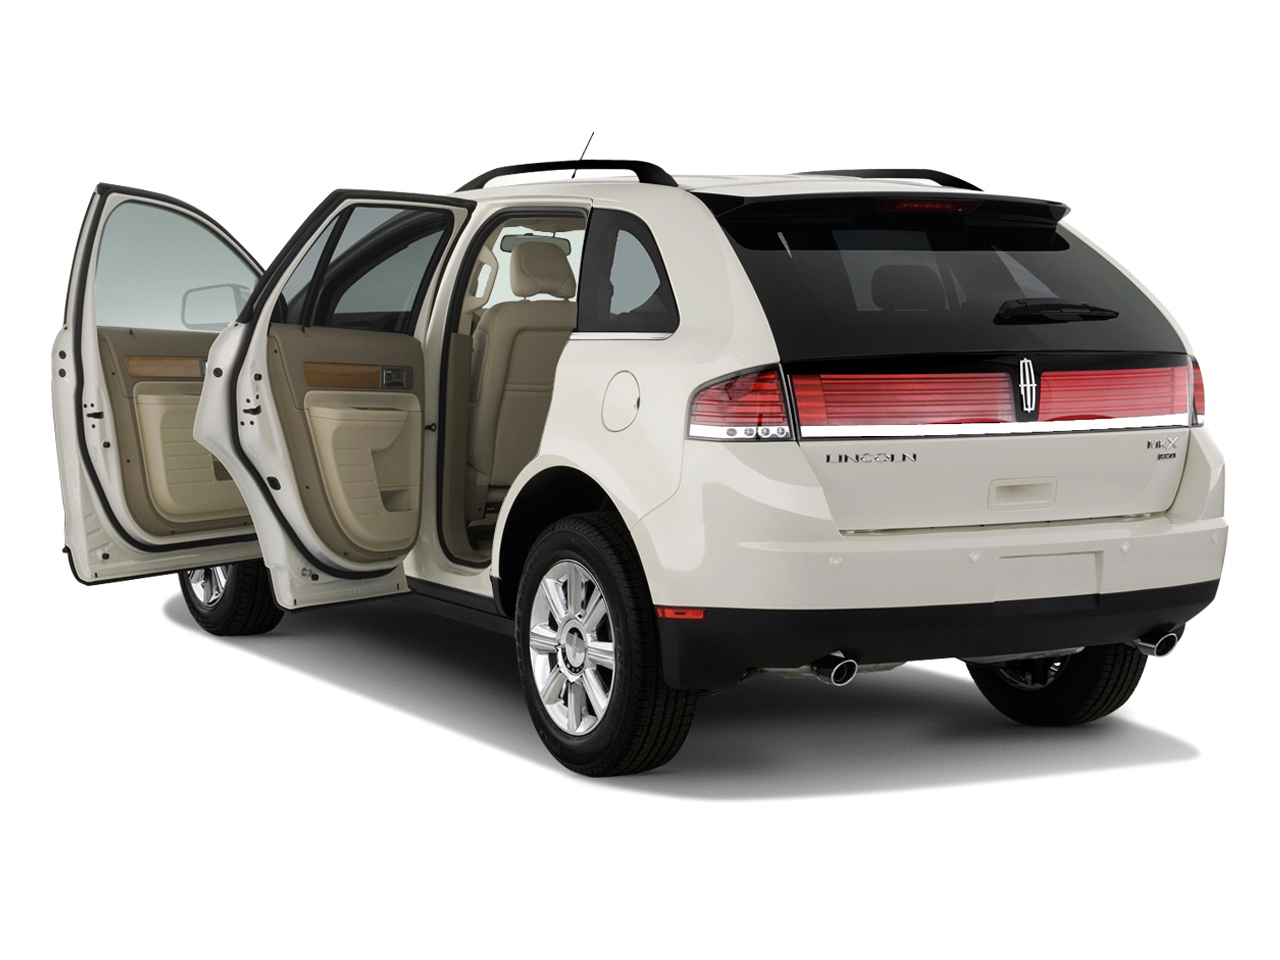 2009 Lincoln MKX Pictures, Prices and Reviews - Driverbase